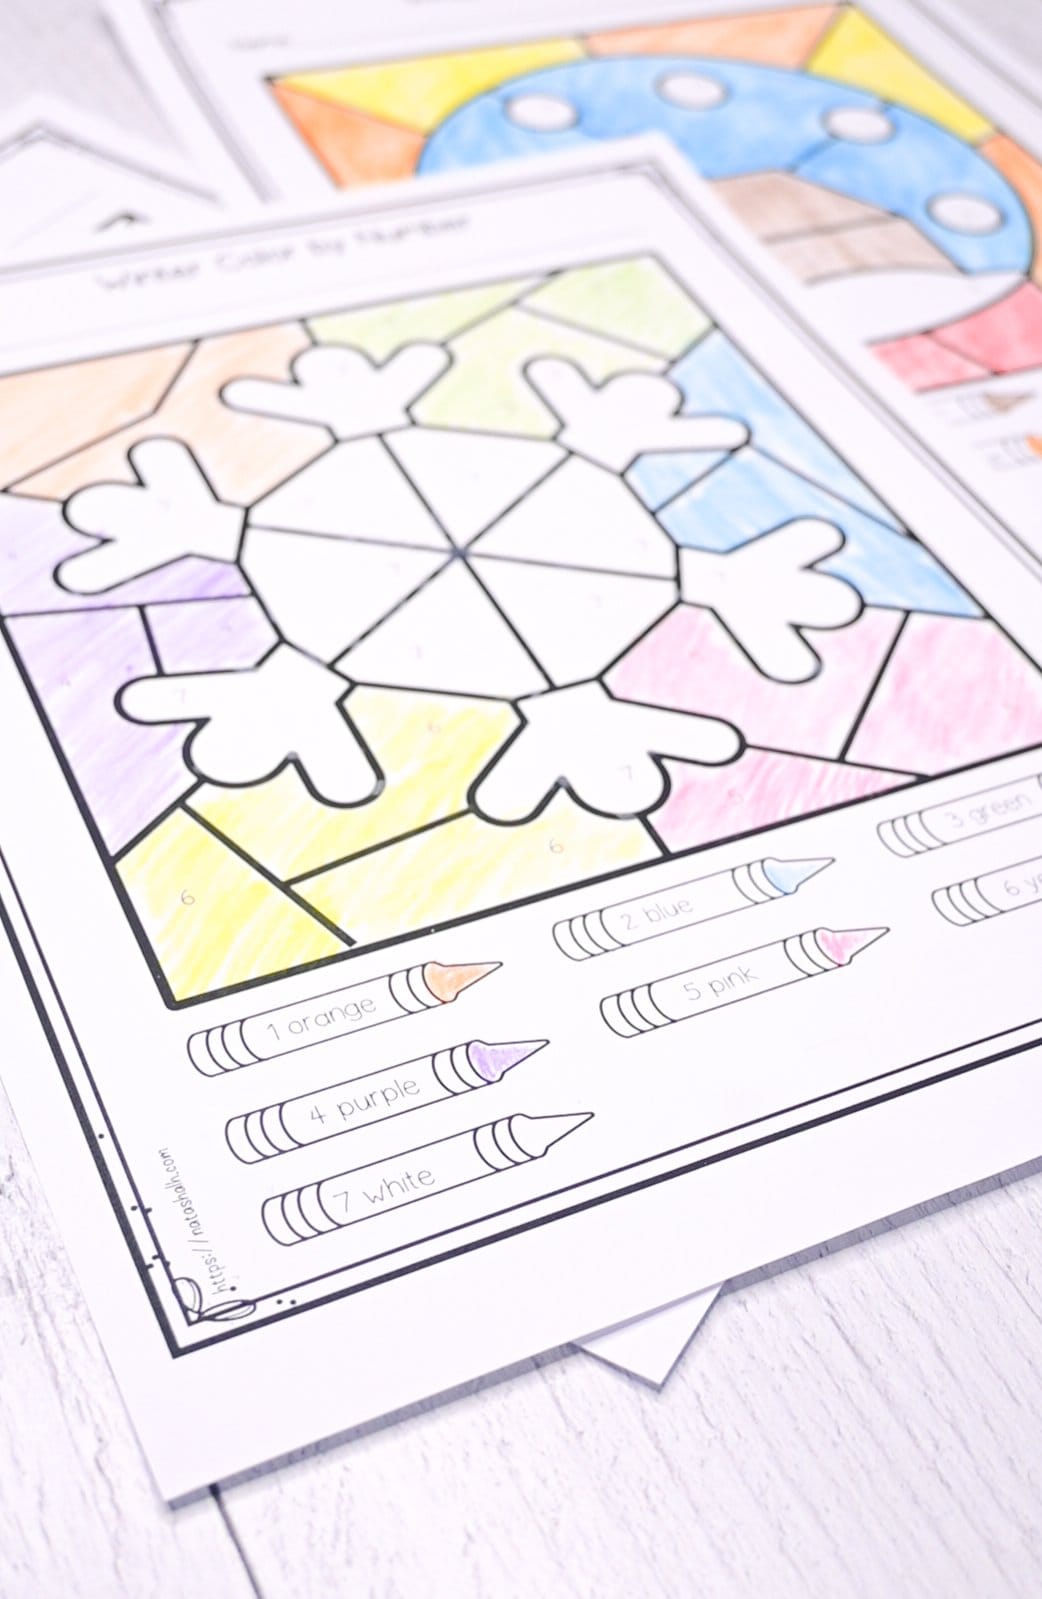 A picture of a completed color by number worksheet with a snowflake